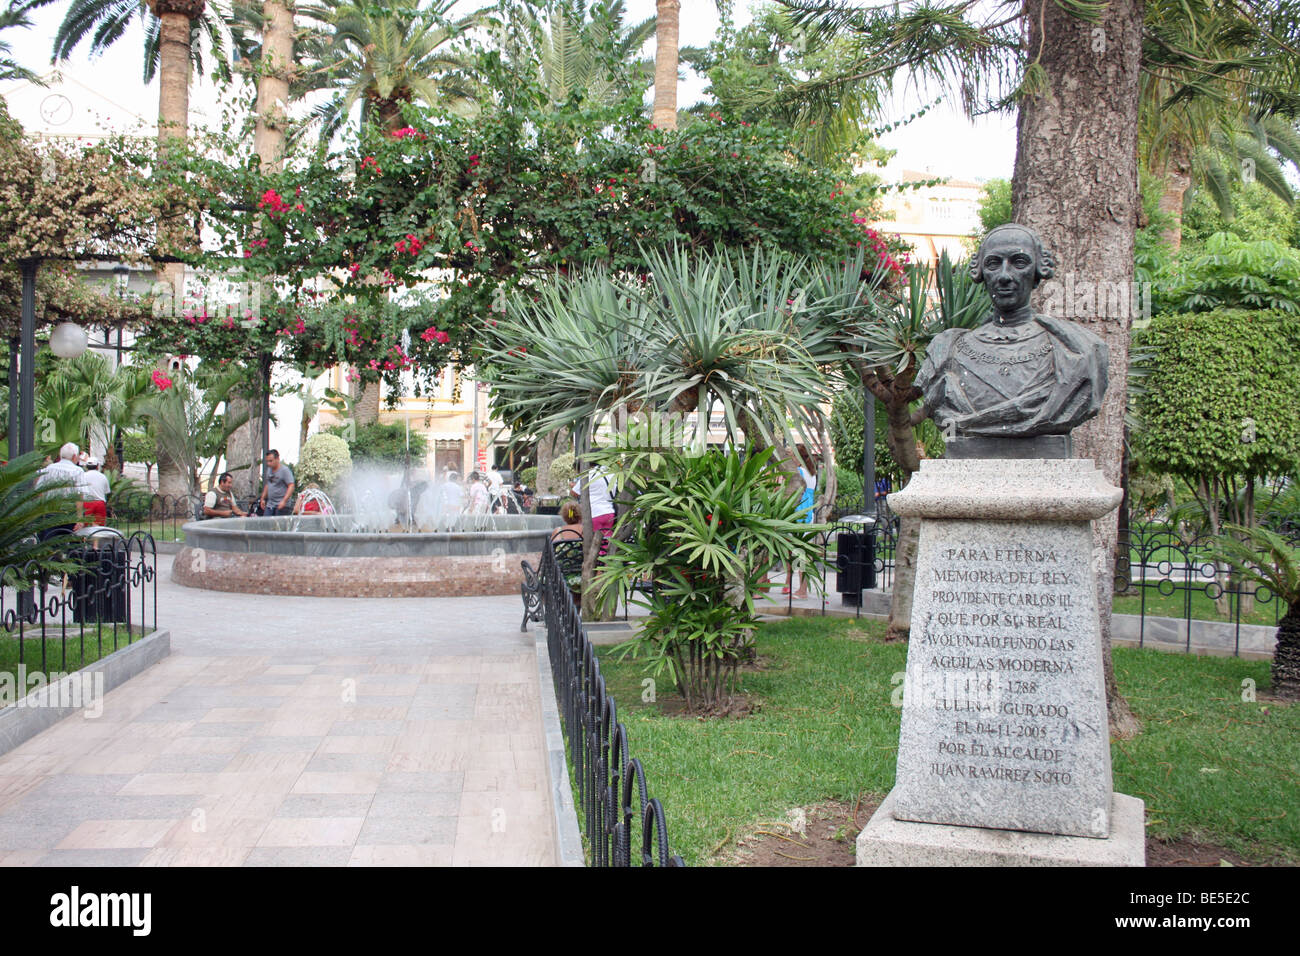 A statue on King Carlos III of Spain in a picturesque setting, Aguilas, Murcia, Spain. Stock Photo